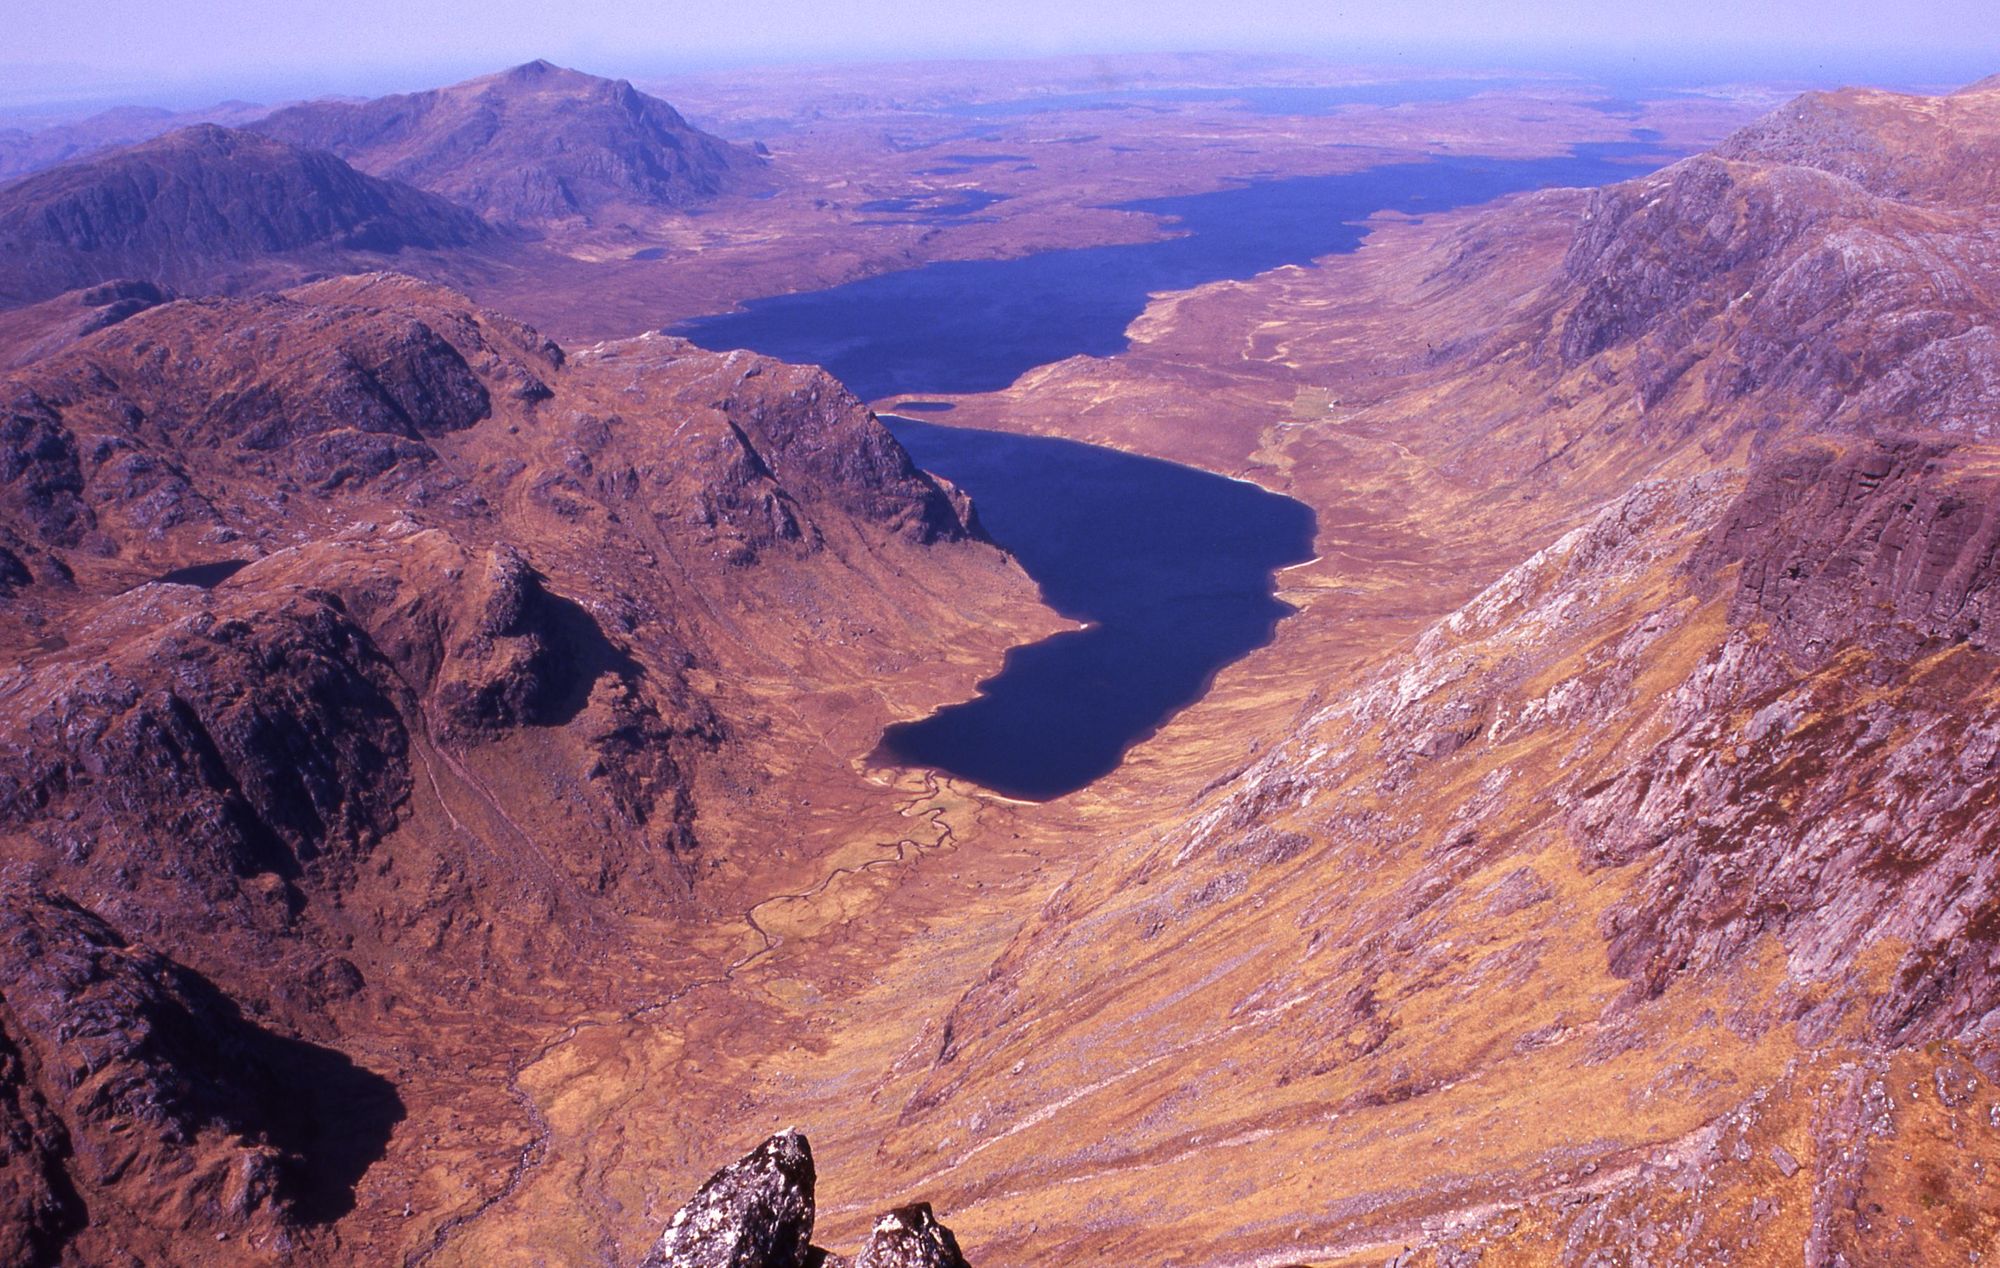 The view northwest, from the summit of A’ Mhaighdean. Photo: Andrew Dempster